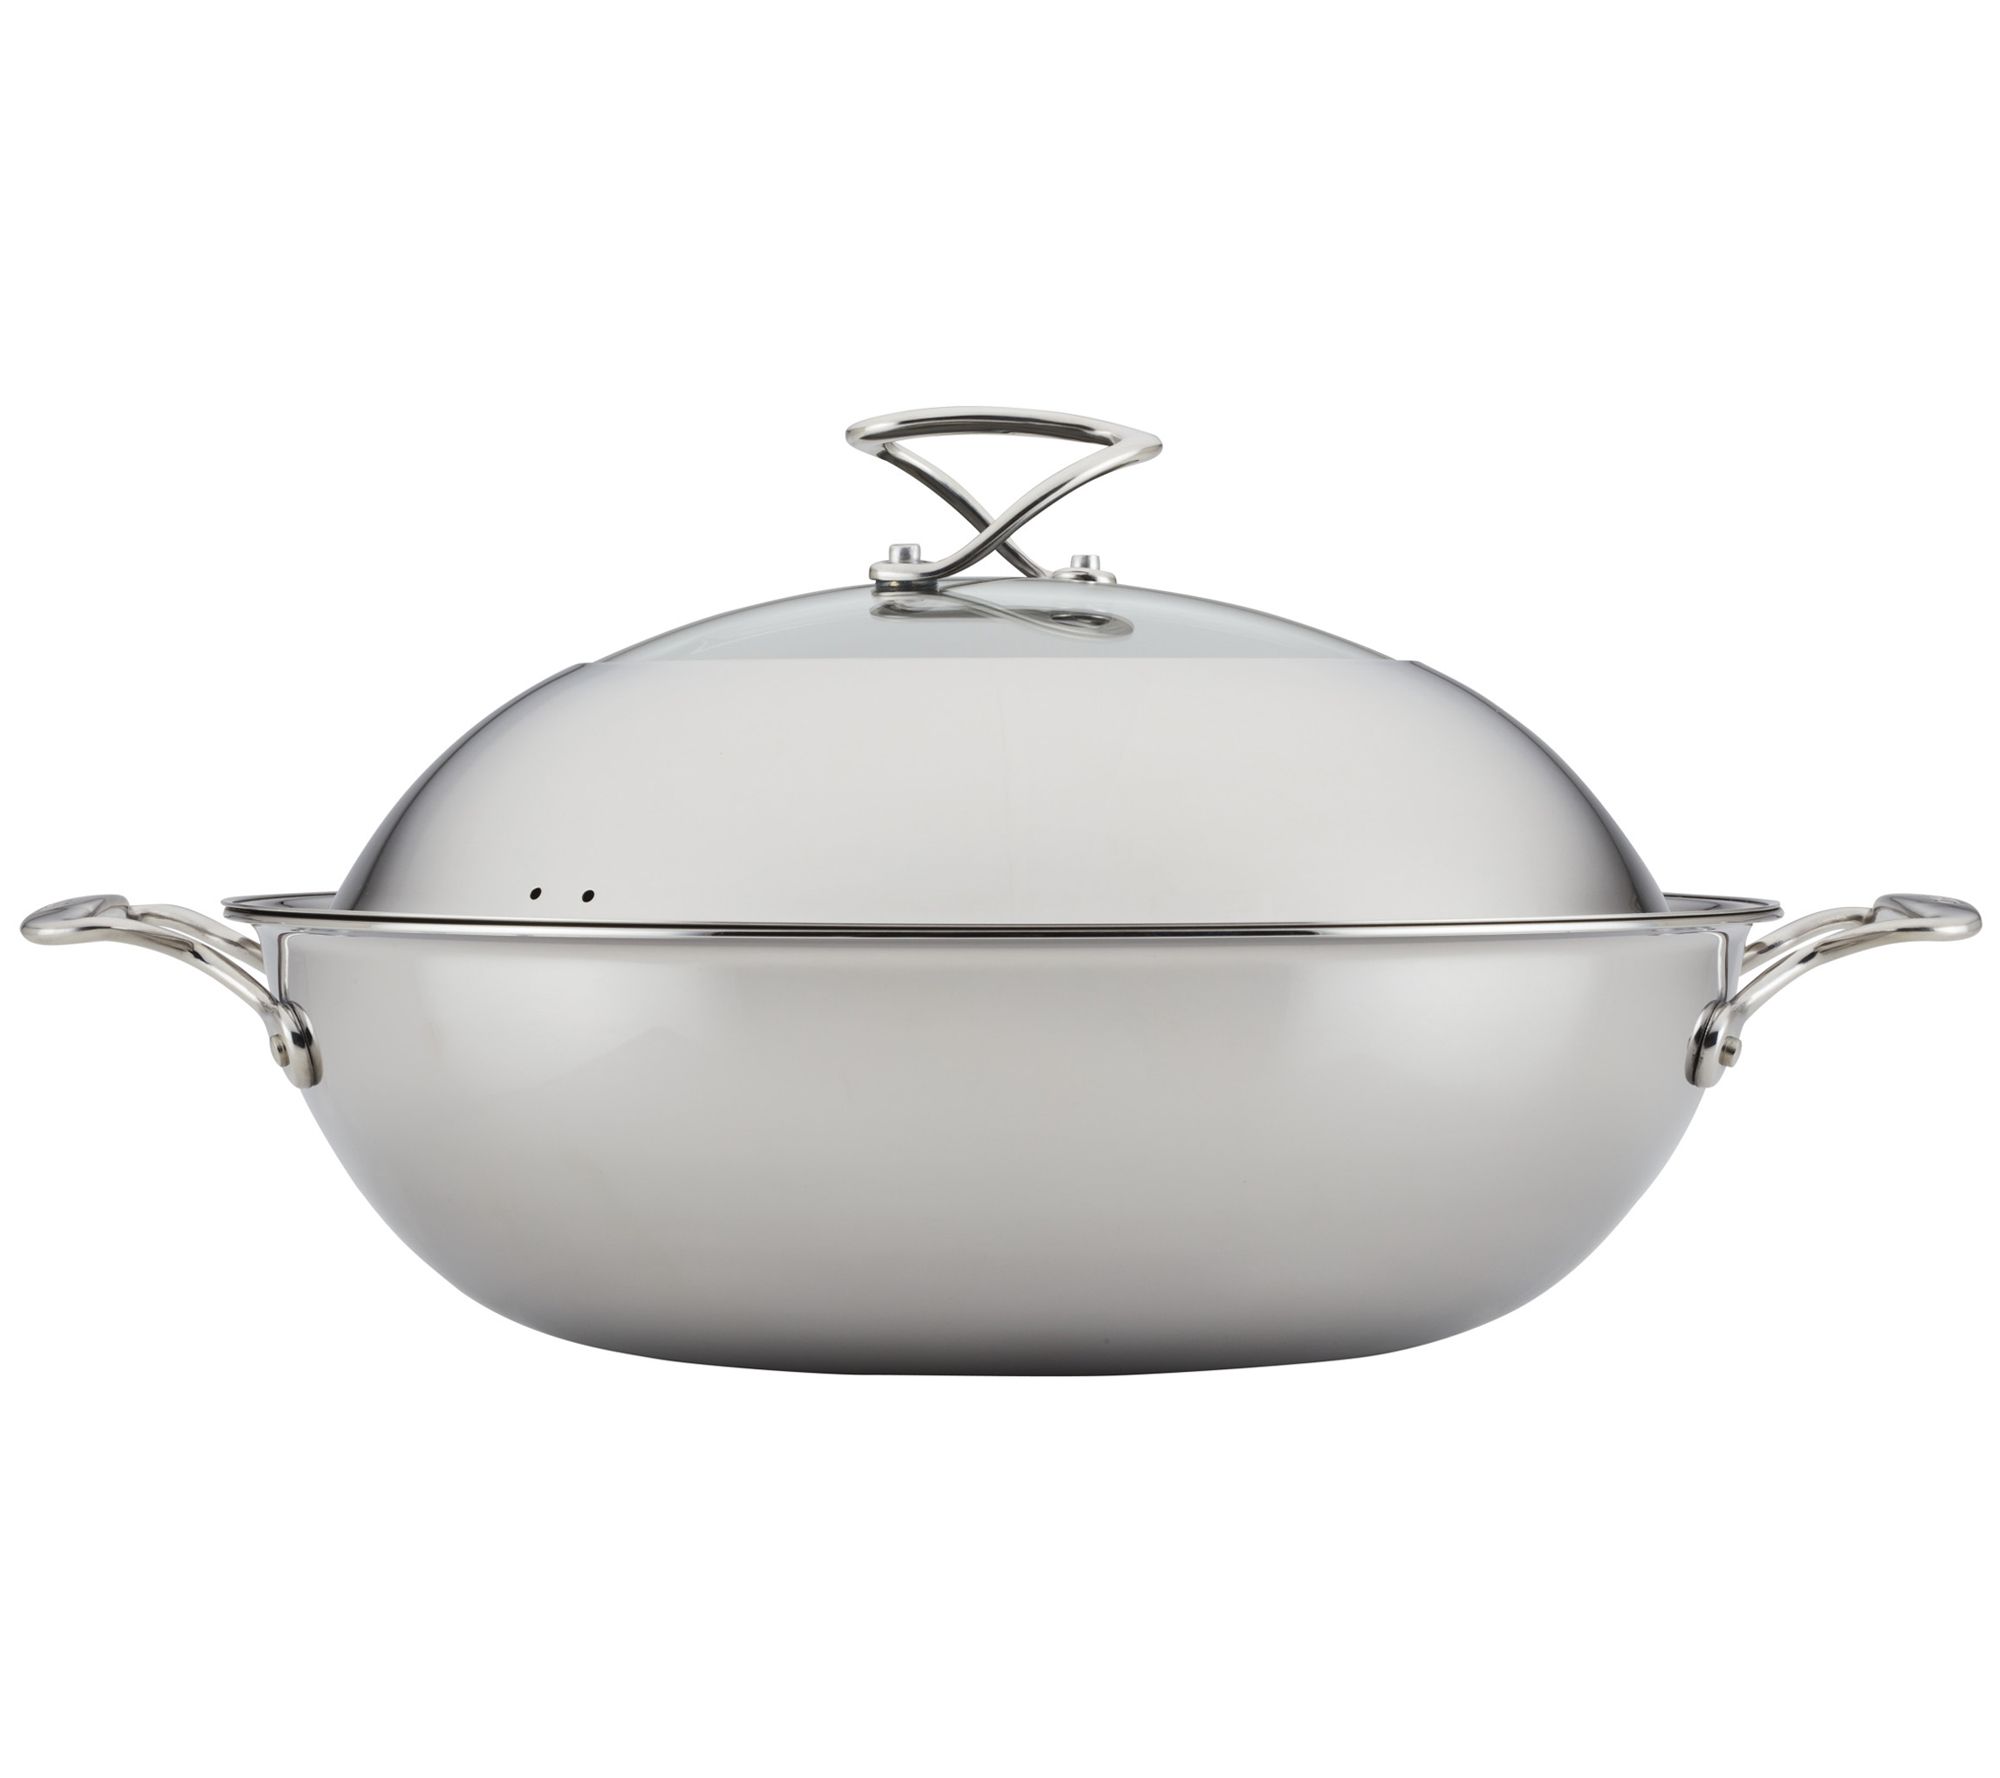 Dash of That Enamel on Steel Stock Pot with Lid - Gray, 8 qt - Kroger